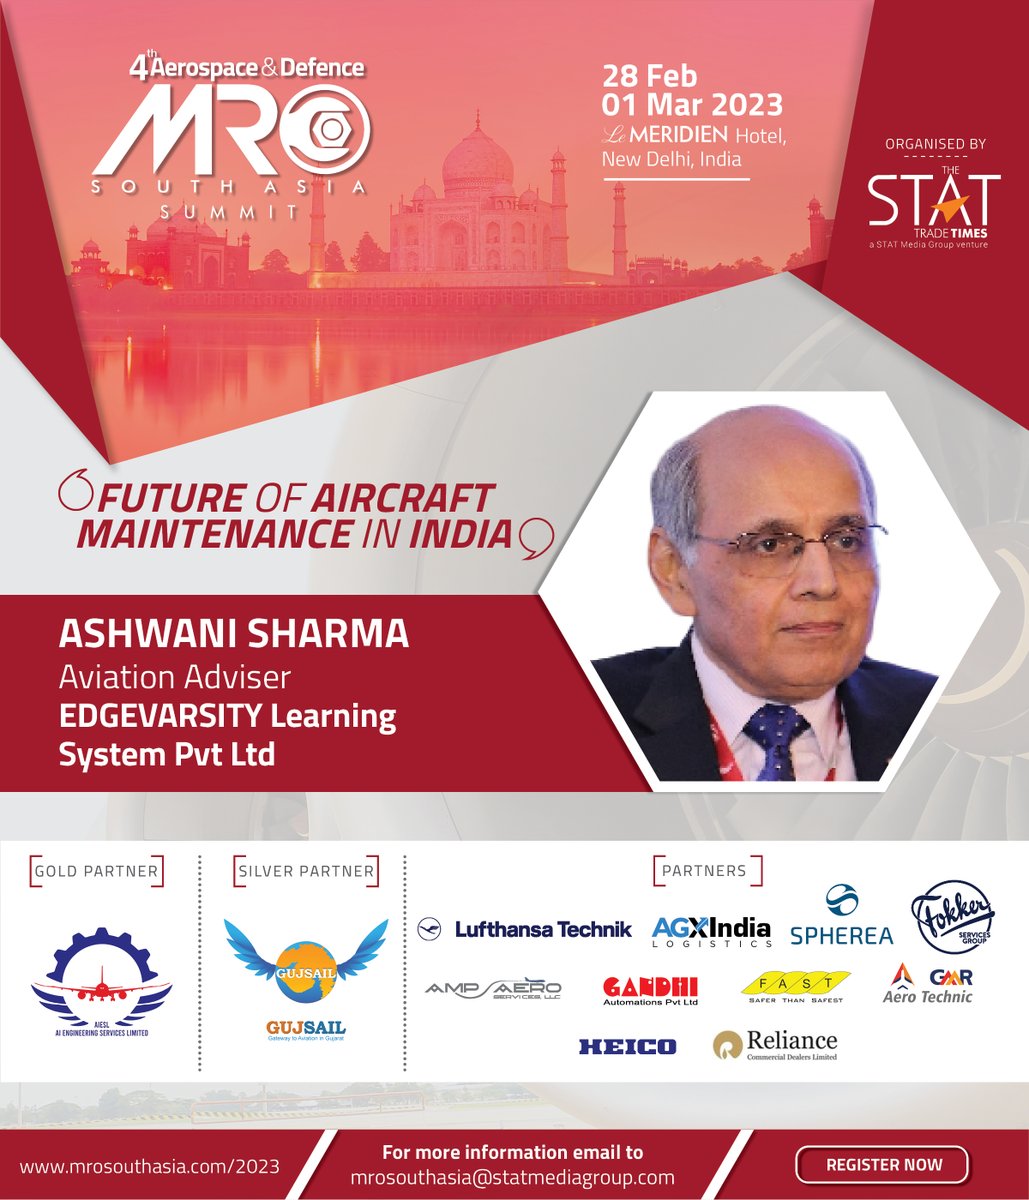 #ViceChairman, The #AeronauticalSocietyofIndia (BOM Branch) and #AviationConsultant at @edge_varsity , Ashwani Sharma will be a distinguished #speaker at the 4th #Aerospace and #Defence, @MROSouthAsia 2023 to be held at Le Meridien, #NewDelhi, #India from Feb 28 to Mar 1.